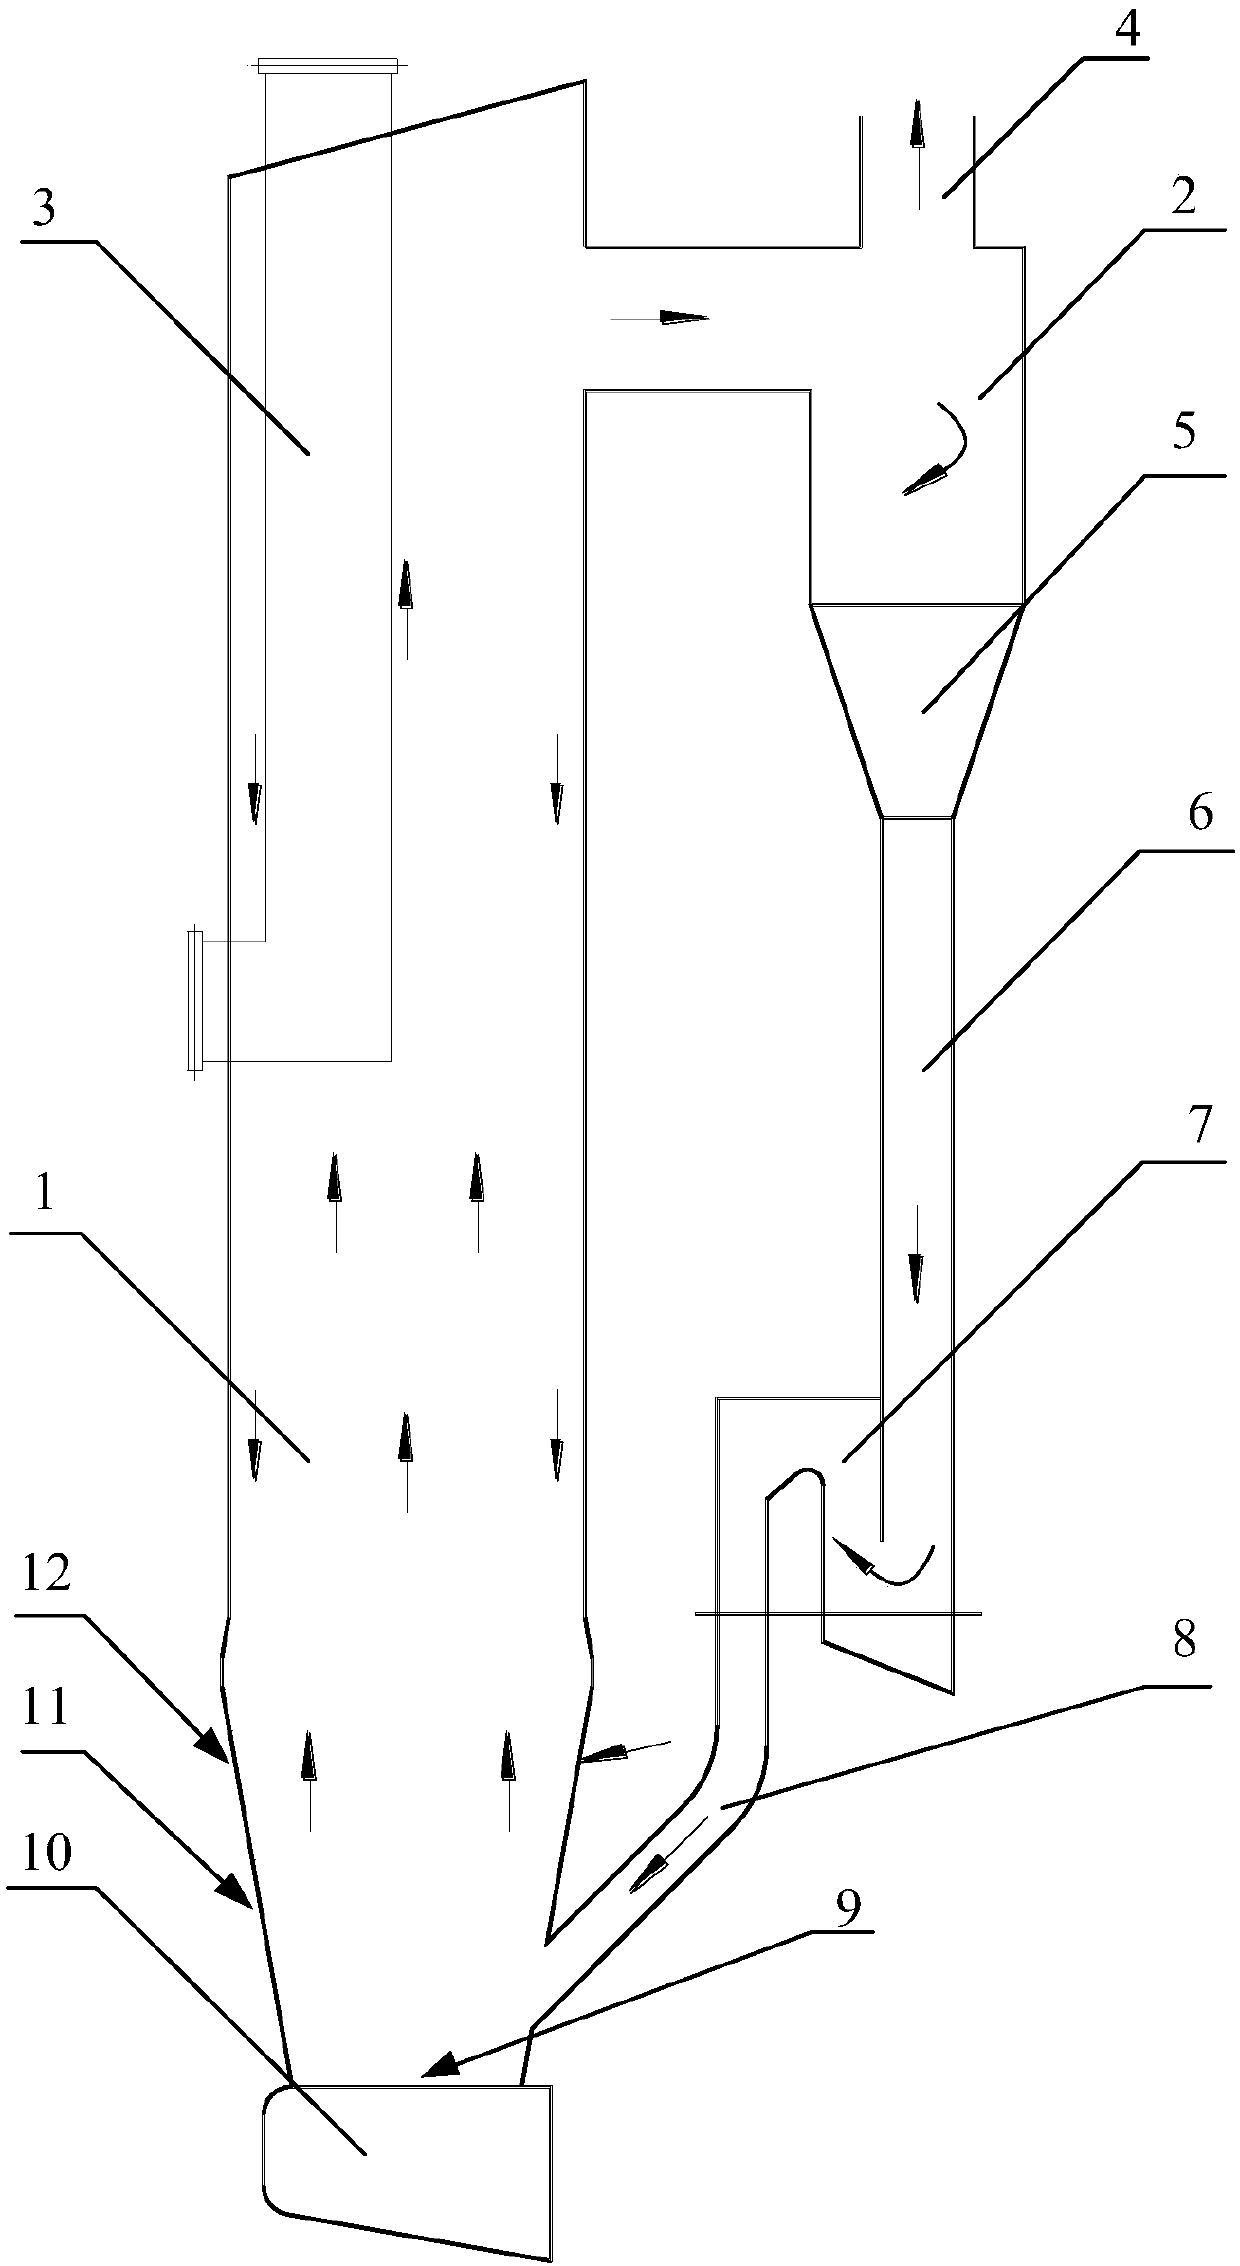 Circulating fluidized bed boiler system